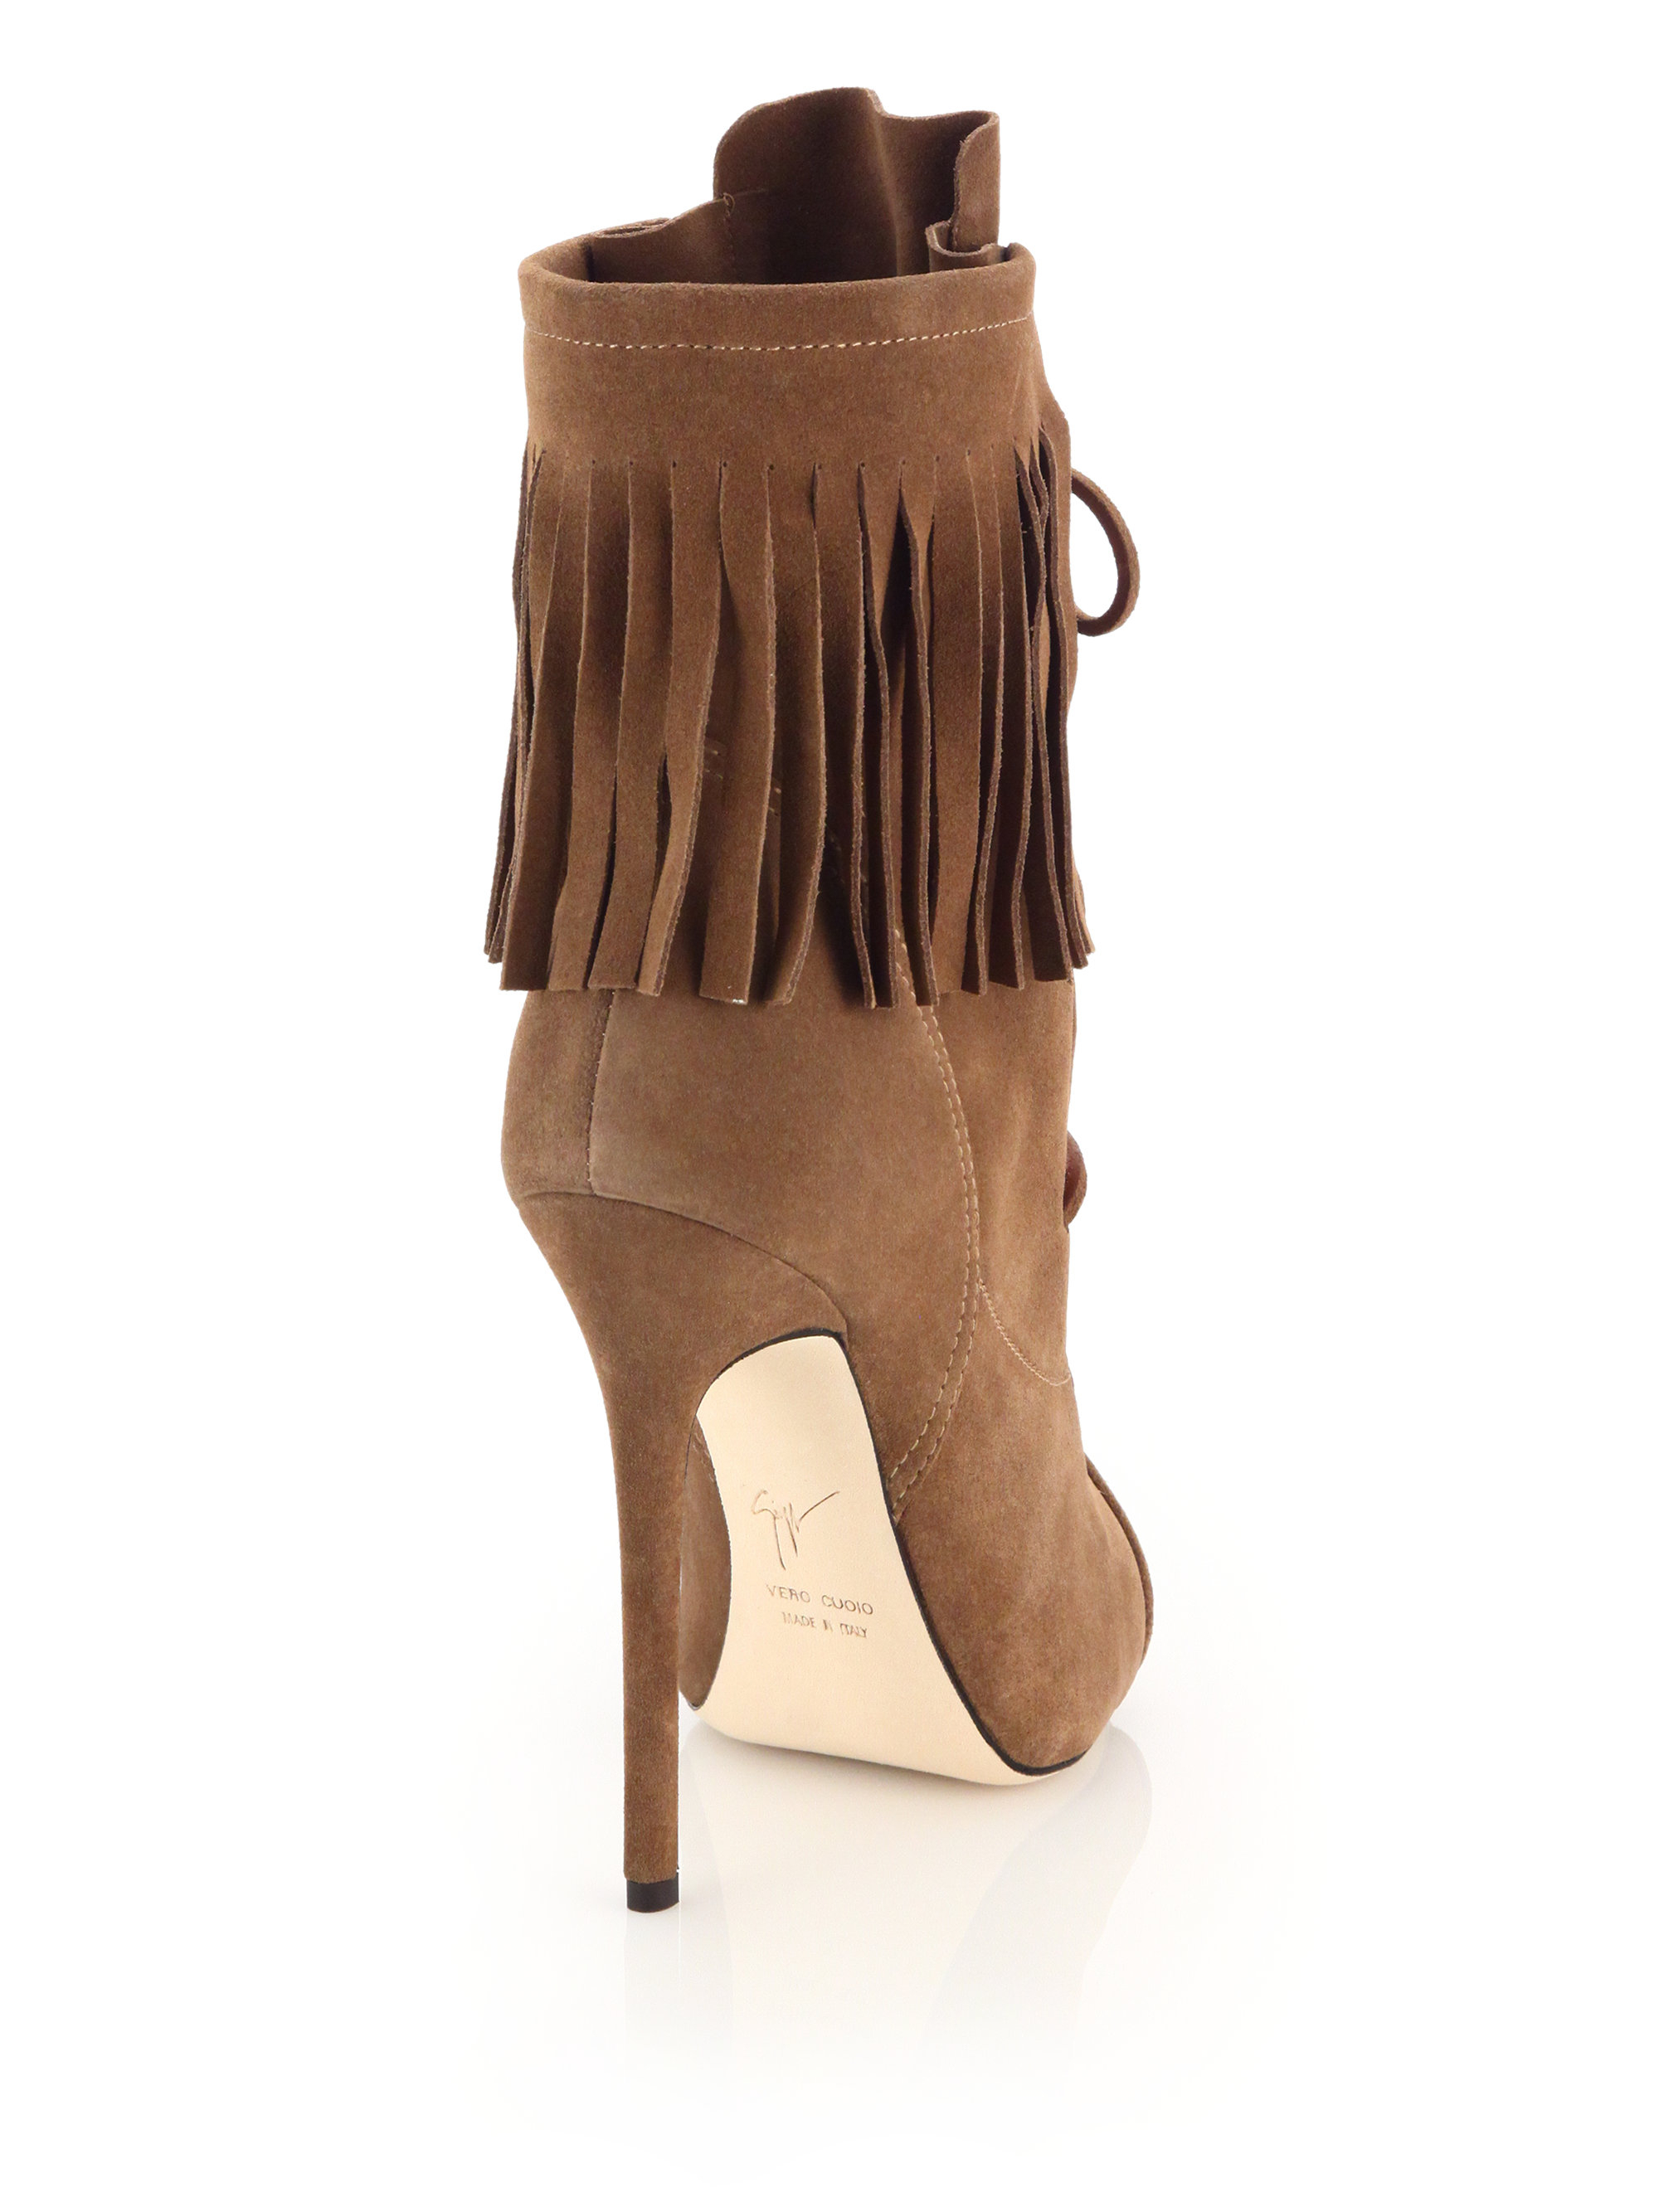 Lyst - Giuseppe Zanotti Fringed Suede Lace-up Peep-toe Booties in Brown